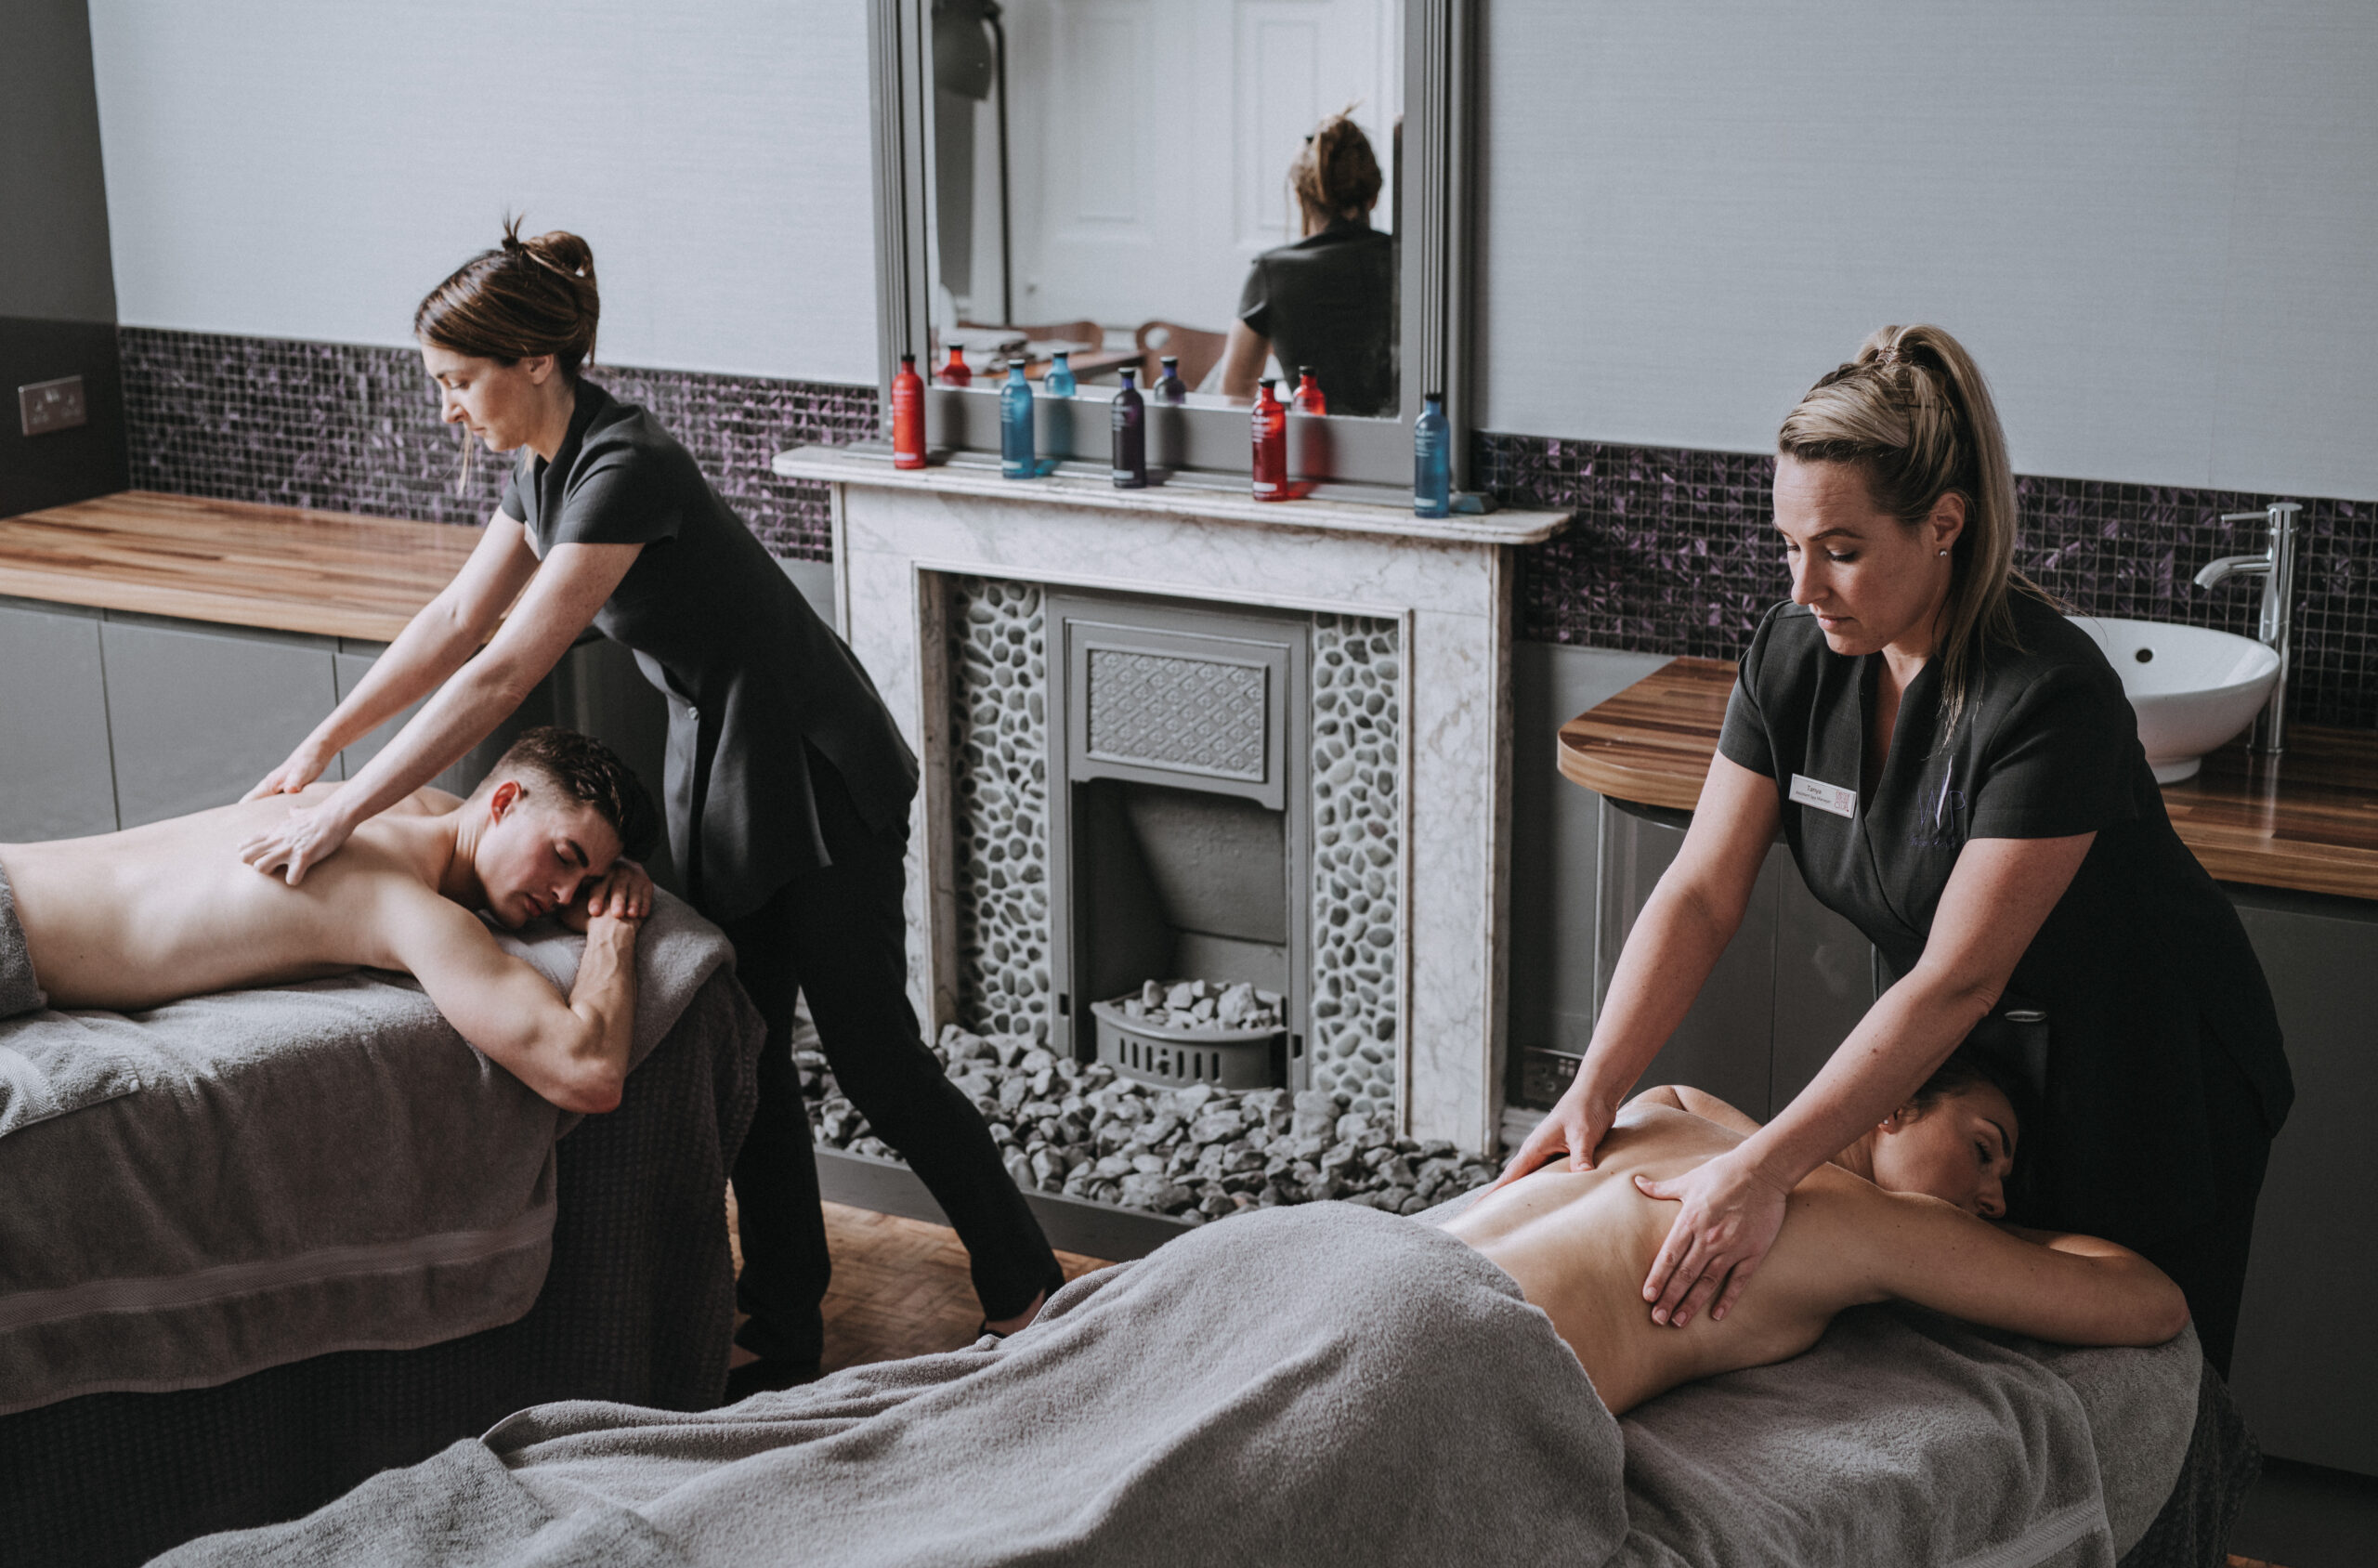 spa day, spa retreat, spa day exeter, wear park spa, exeter golf and country club, devon spa day, exeter spa day